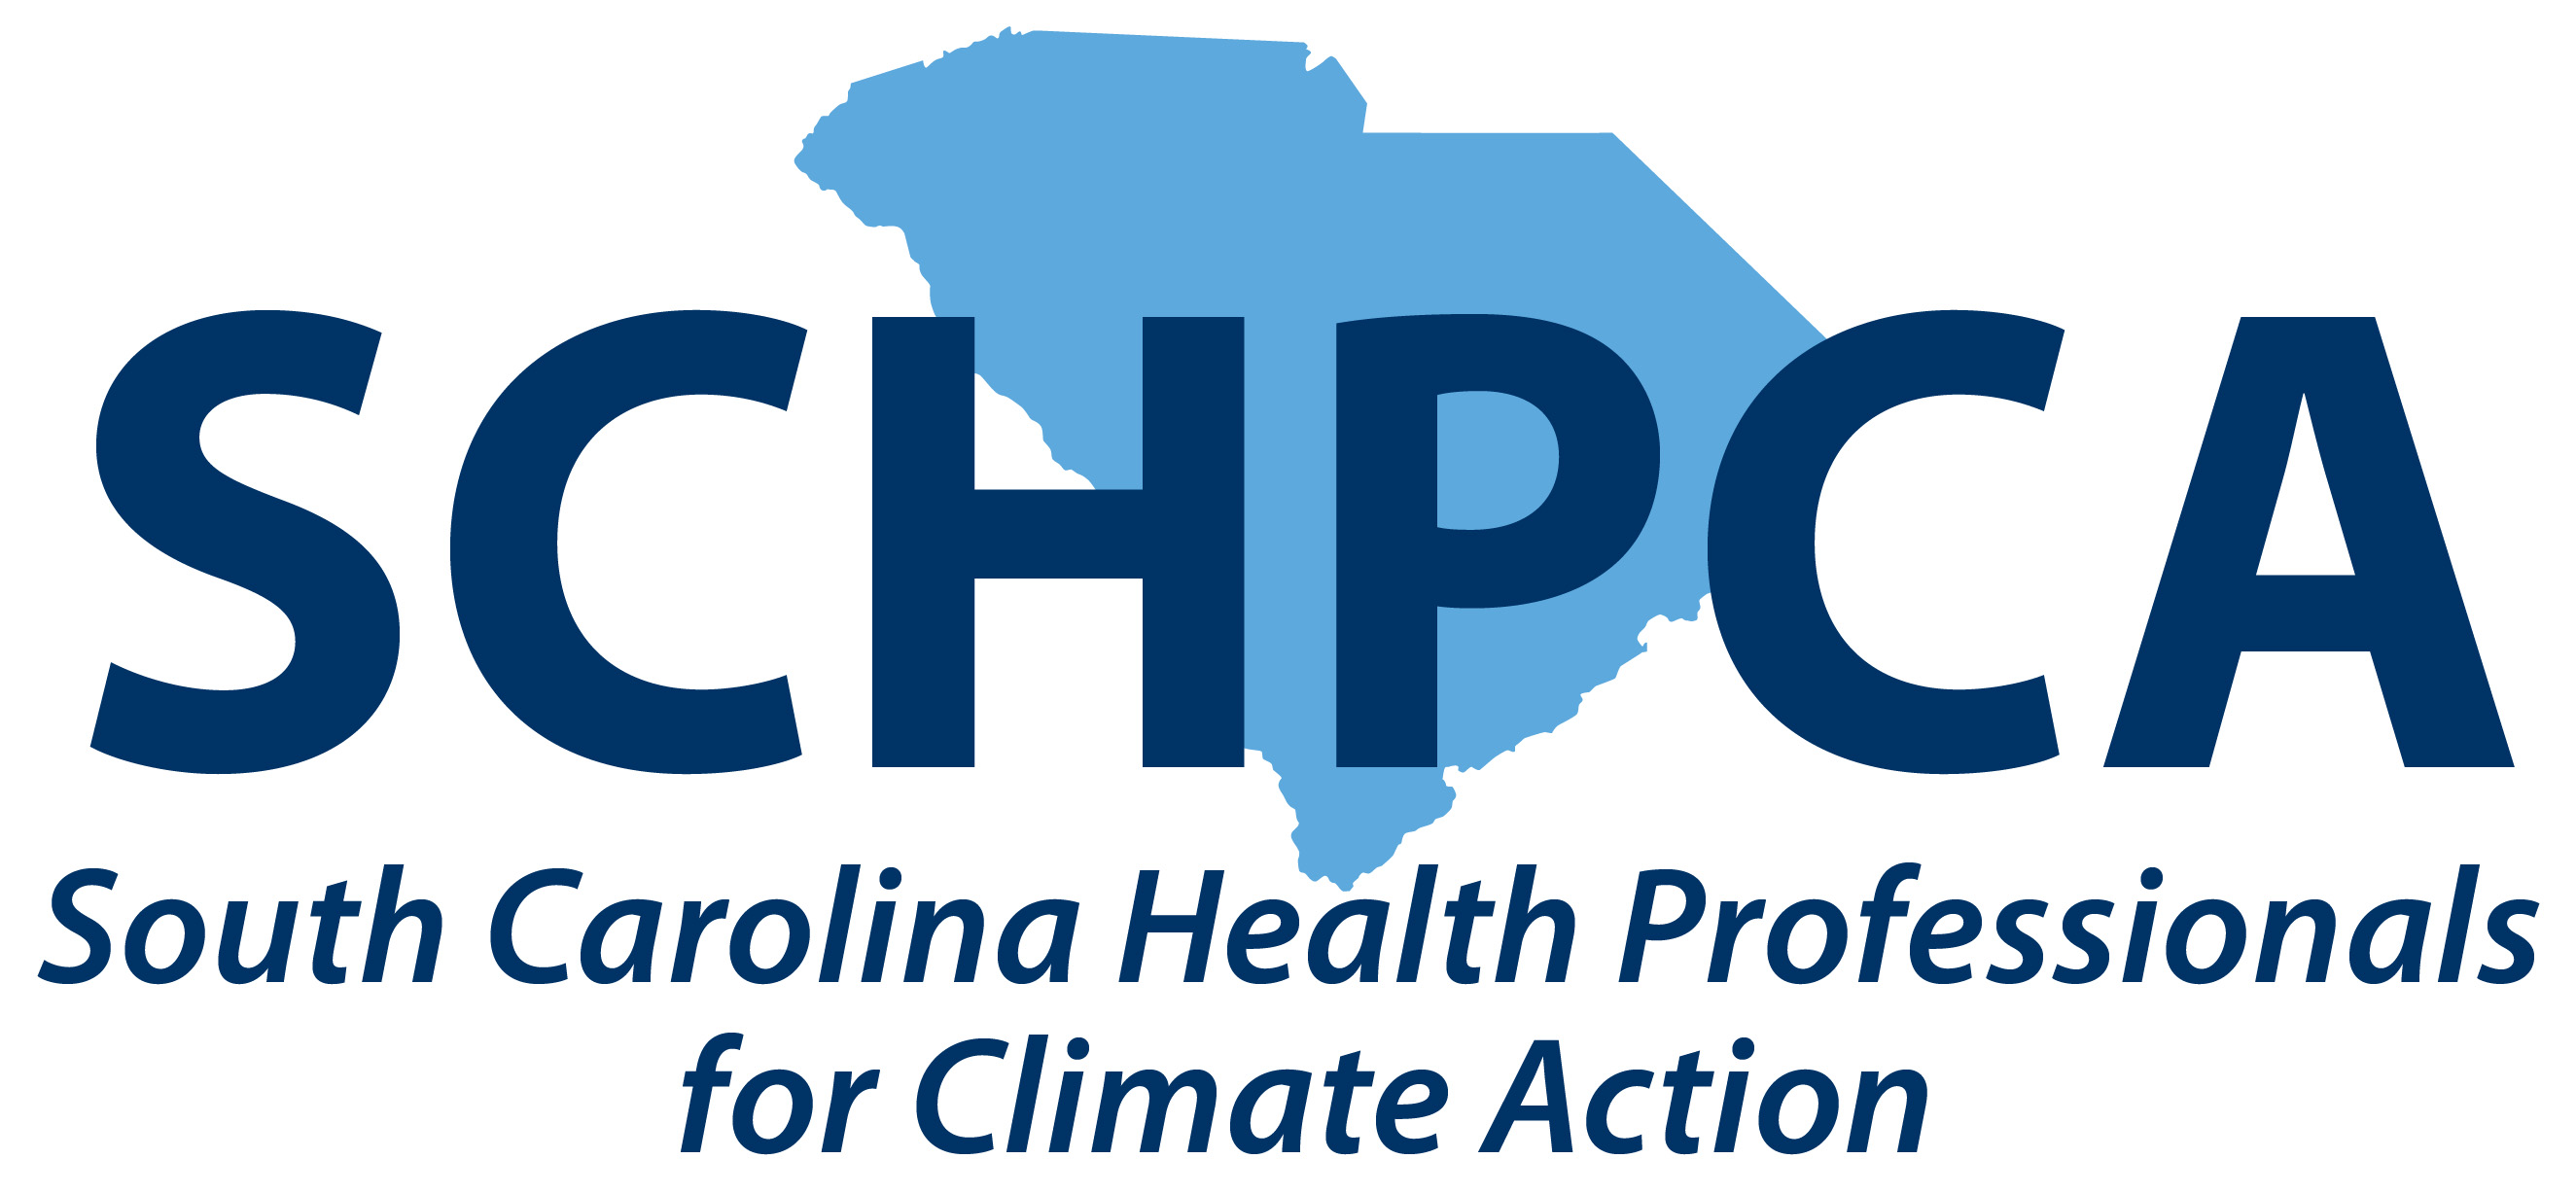 South Carolina Health Professionals for Climate Action